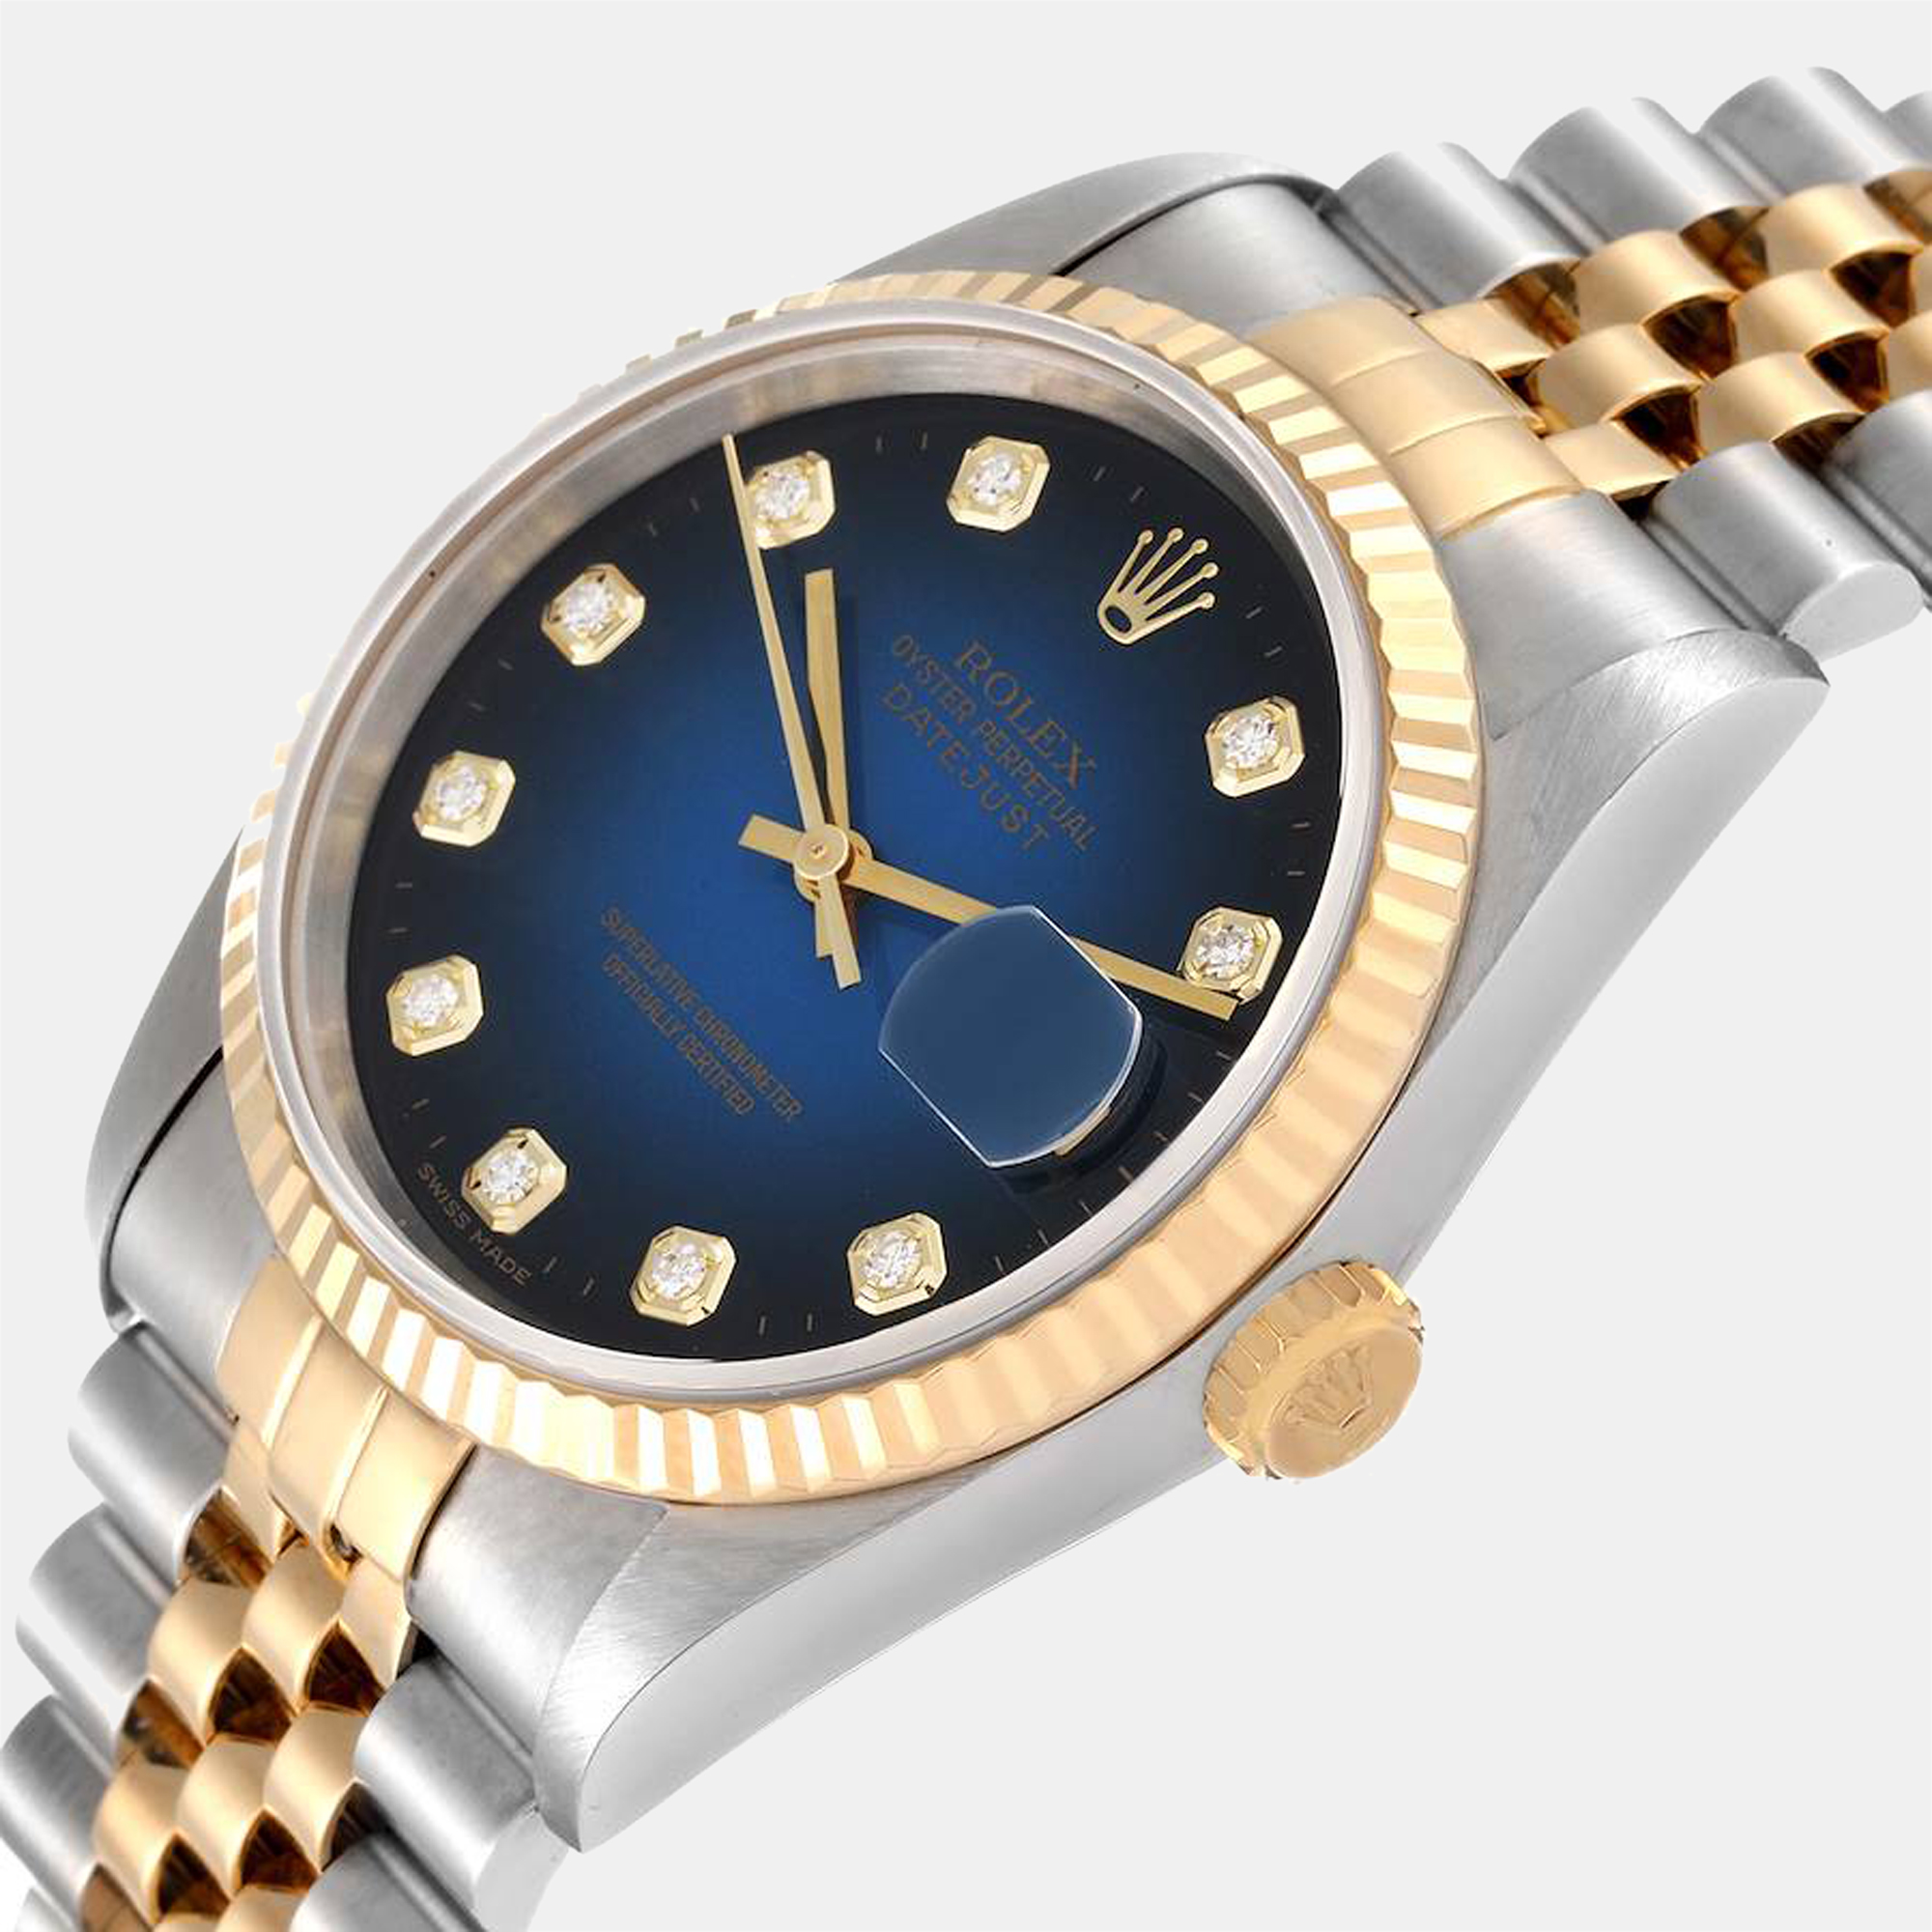 

Rolex Blue Diamonds 18k Yellow Gold And Stainless Steel Datejust 16233 Men's Wristwatch 36 mm